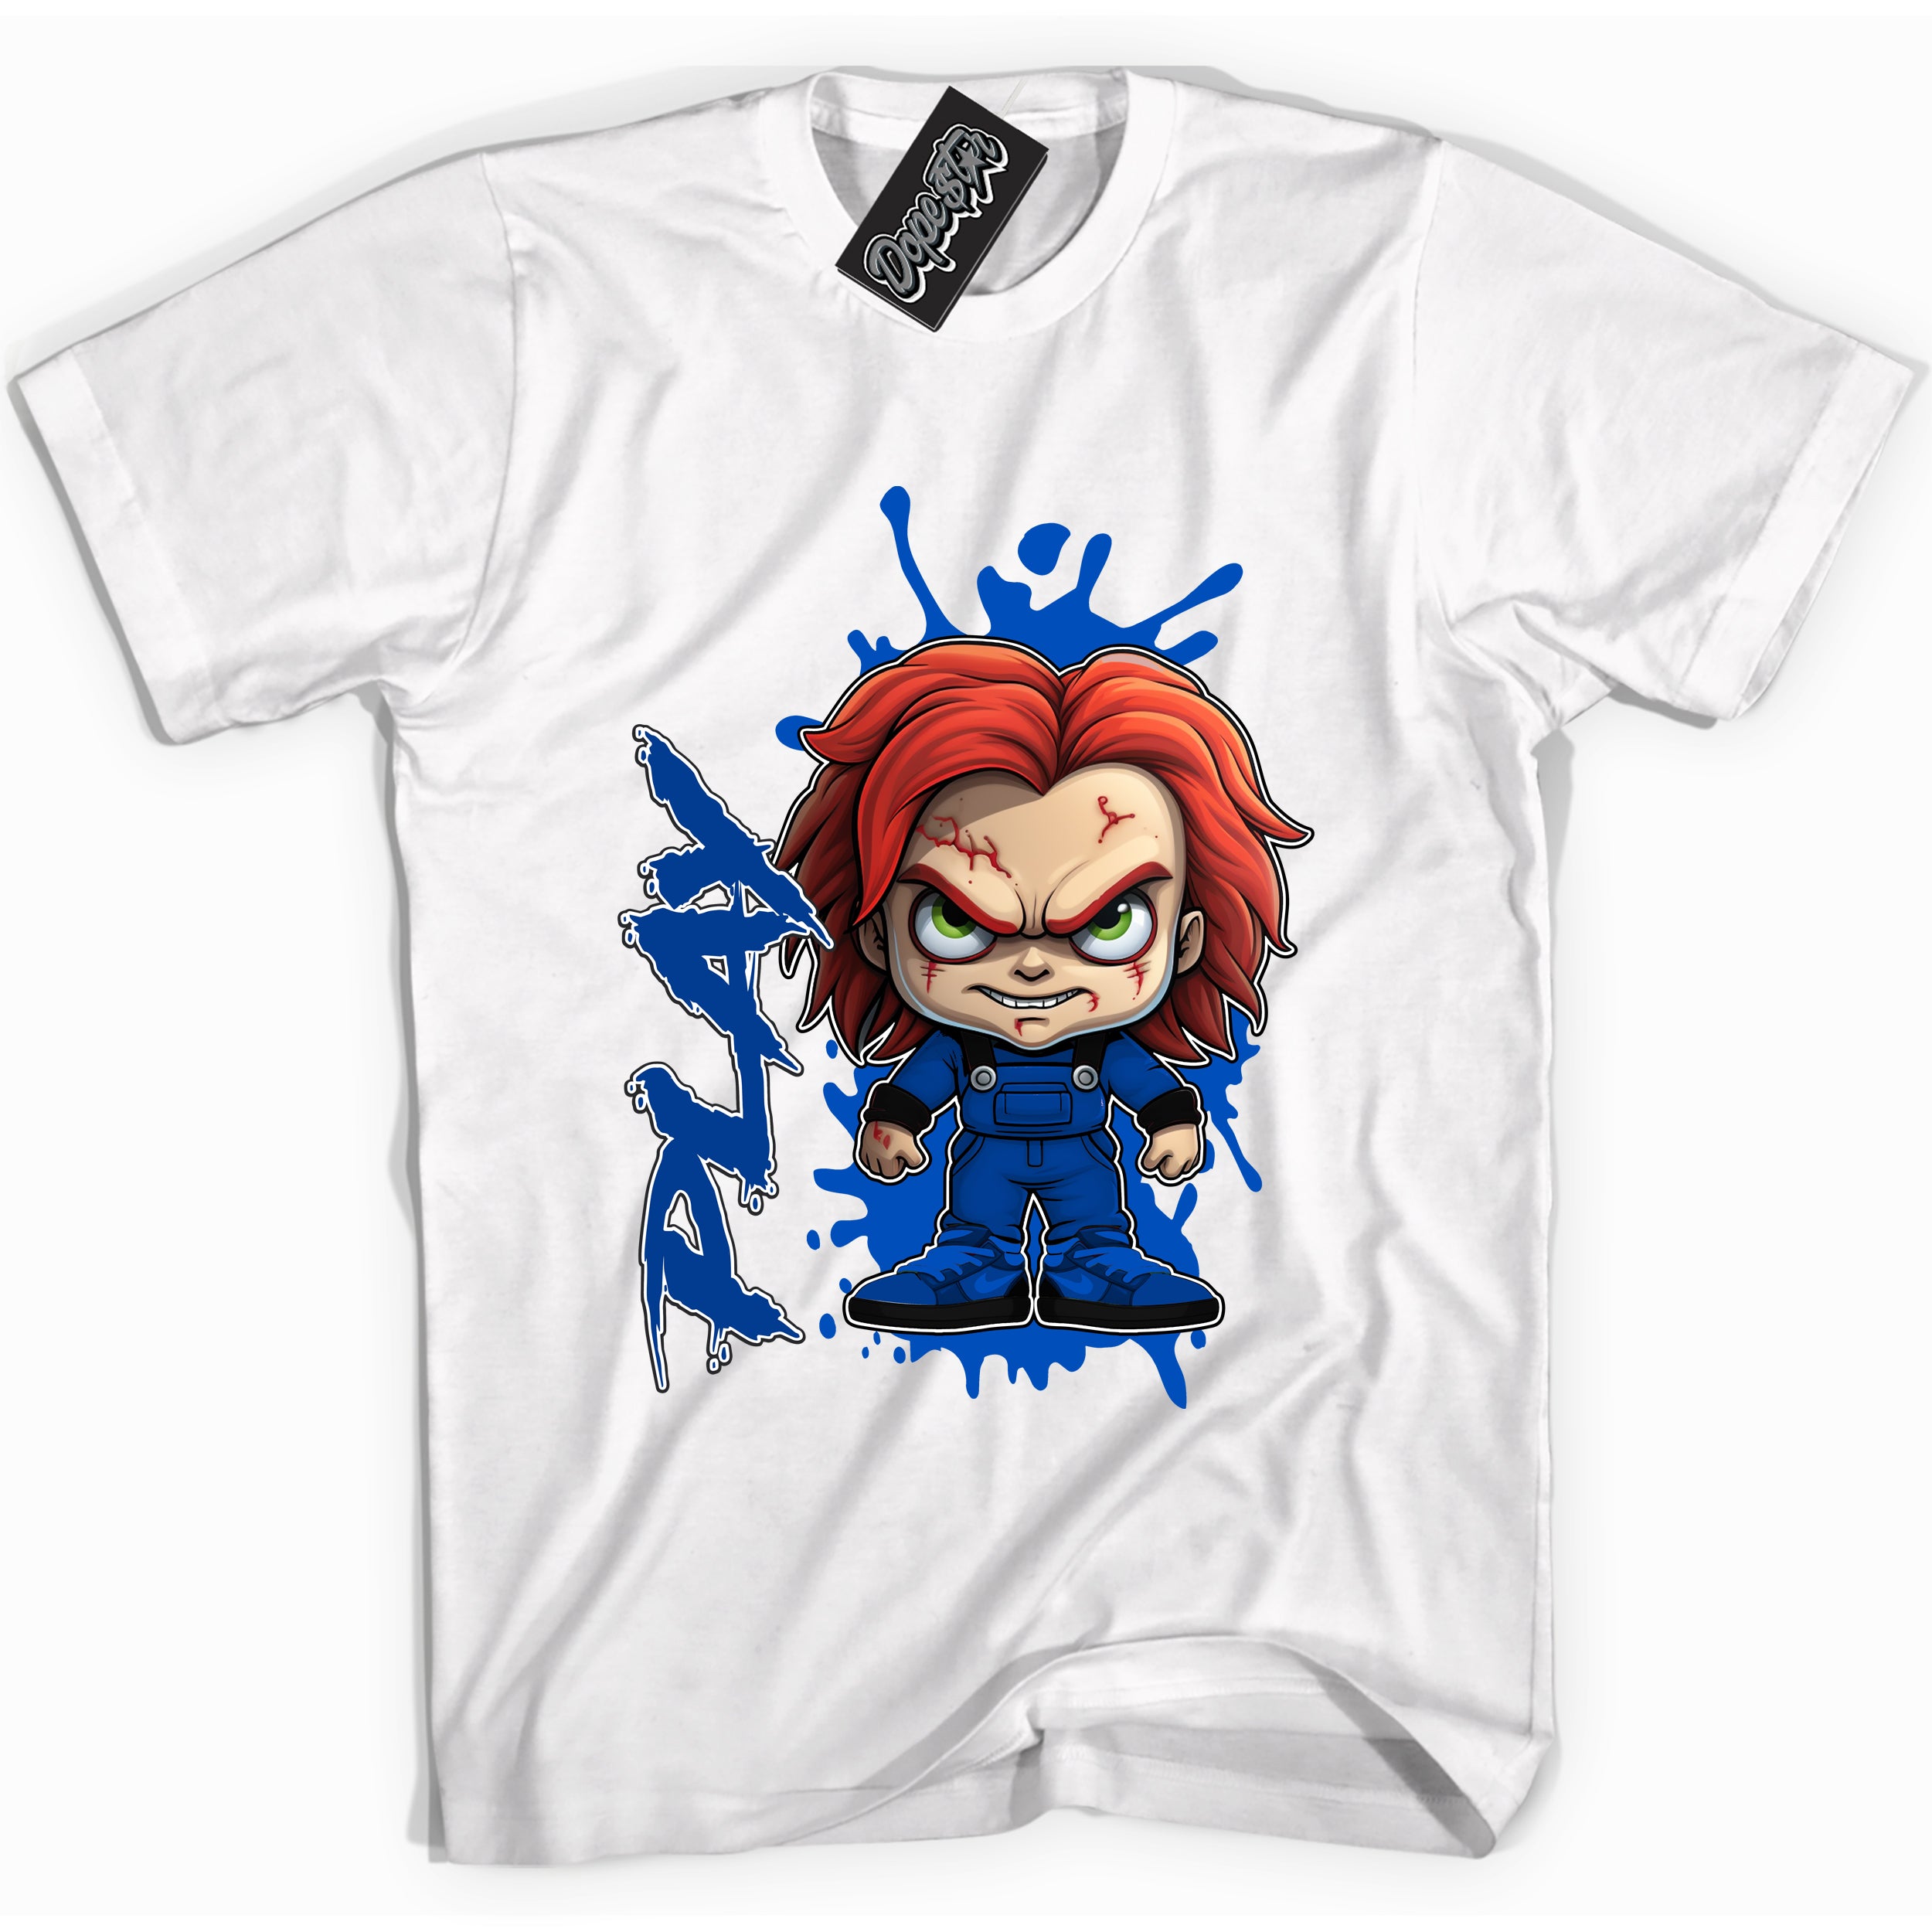 Cool White graphic tee with "Chucky Play" design, that perfectly matches Royal Reimagined 1s sneakers 